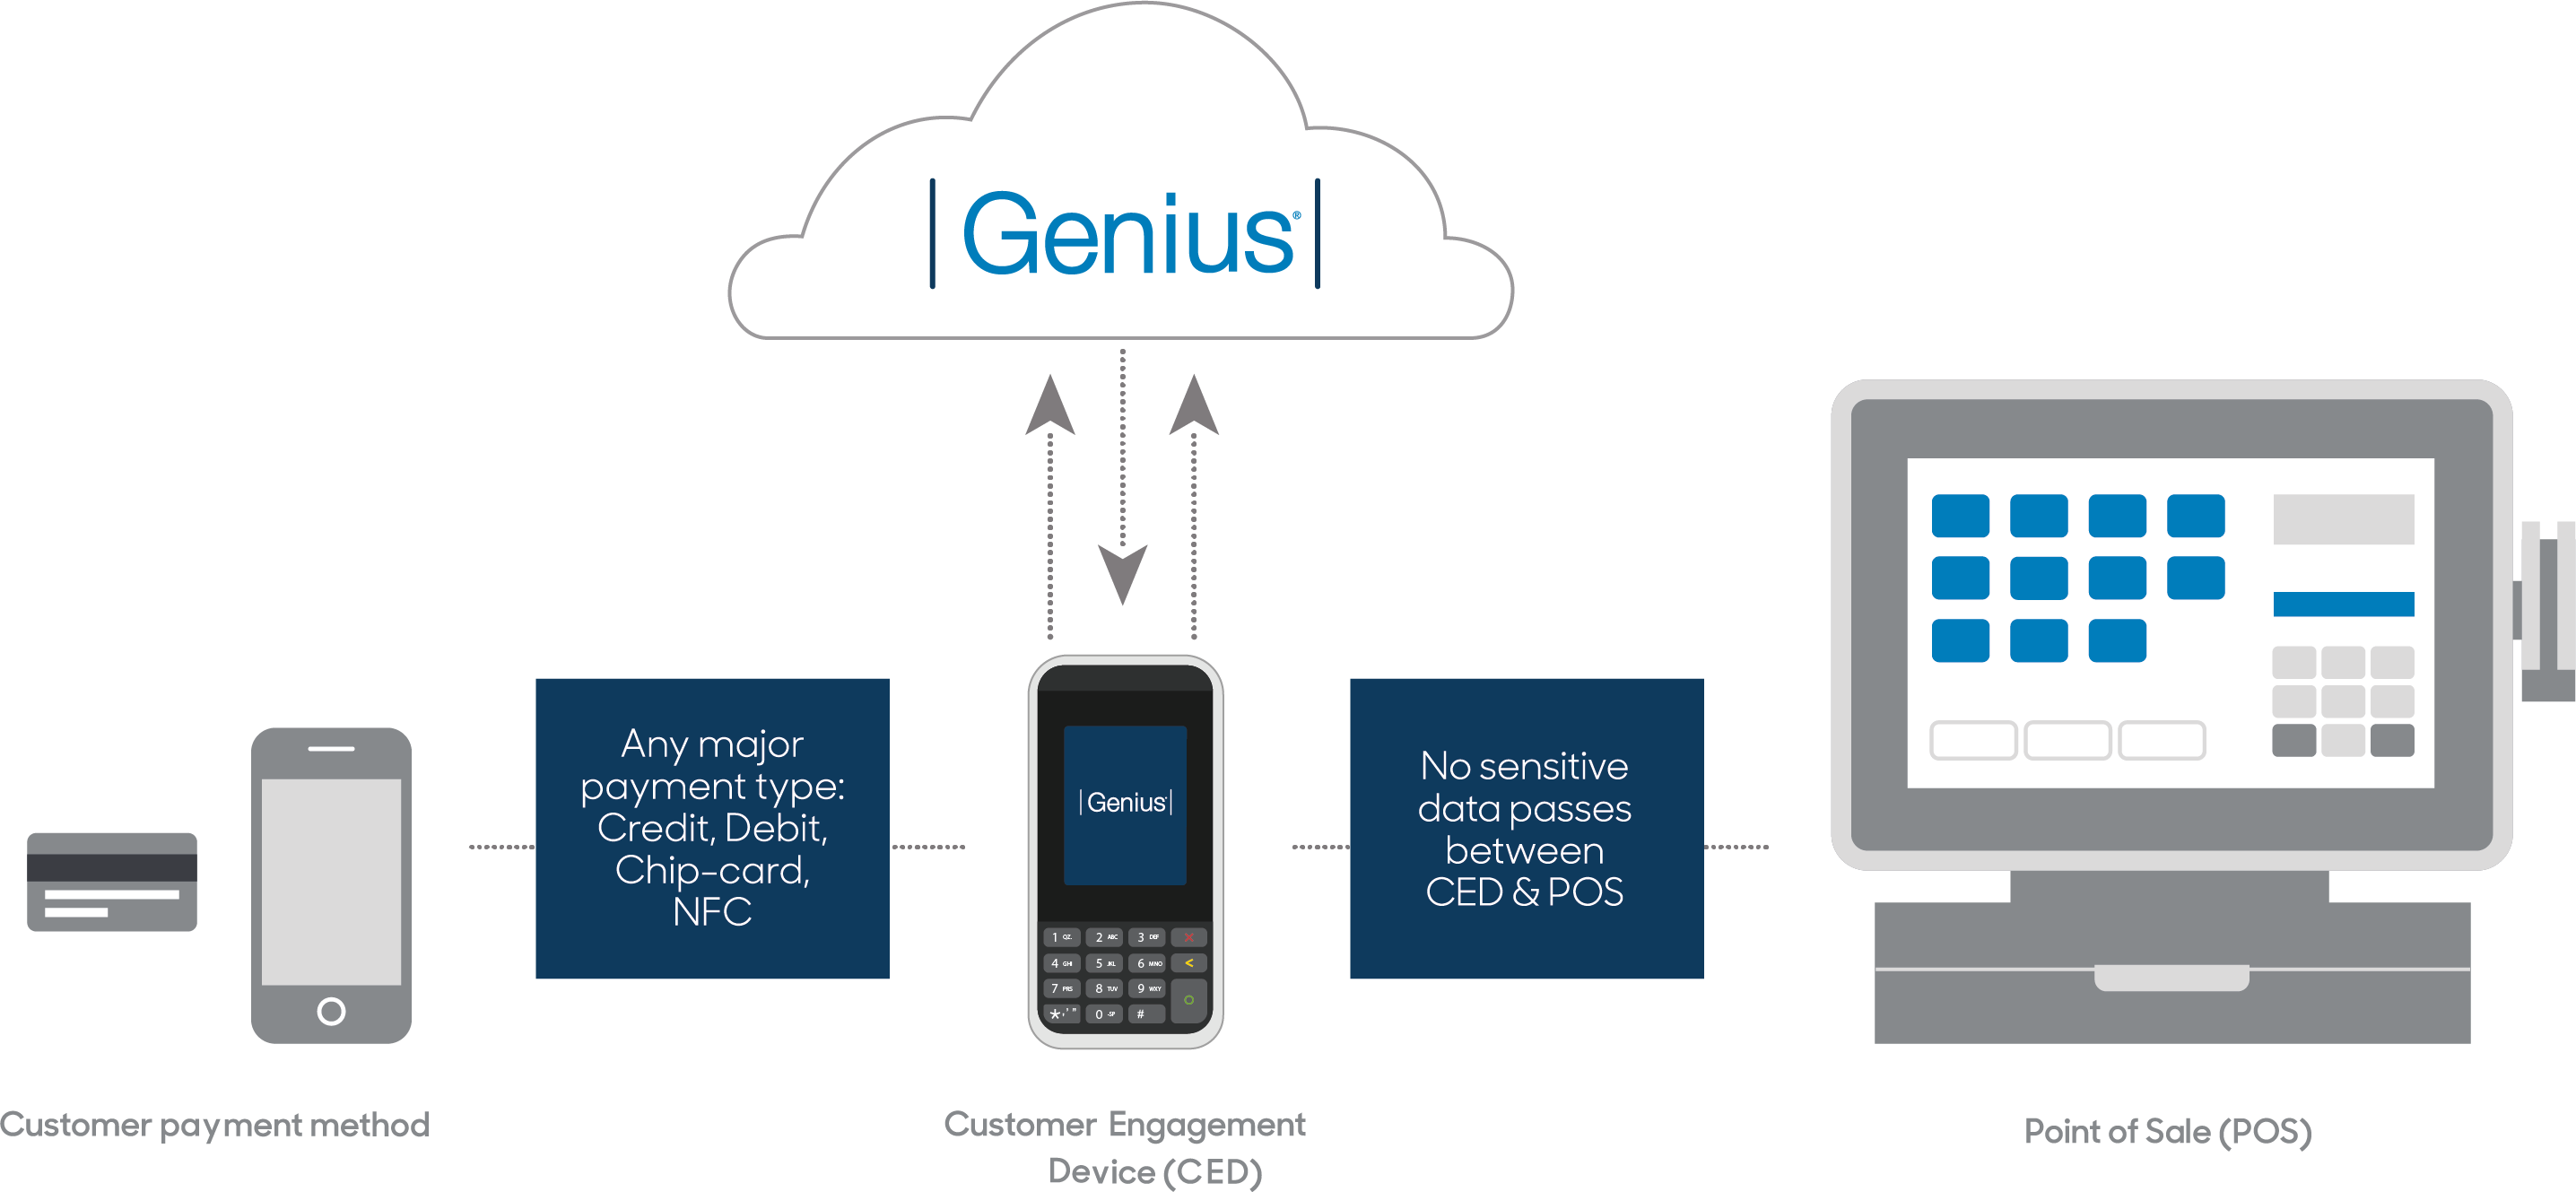 The Genius device connecting to the customer payment method, the POS, and the Genius CEP.